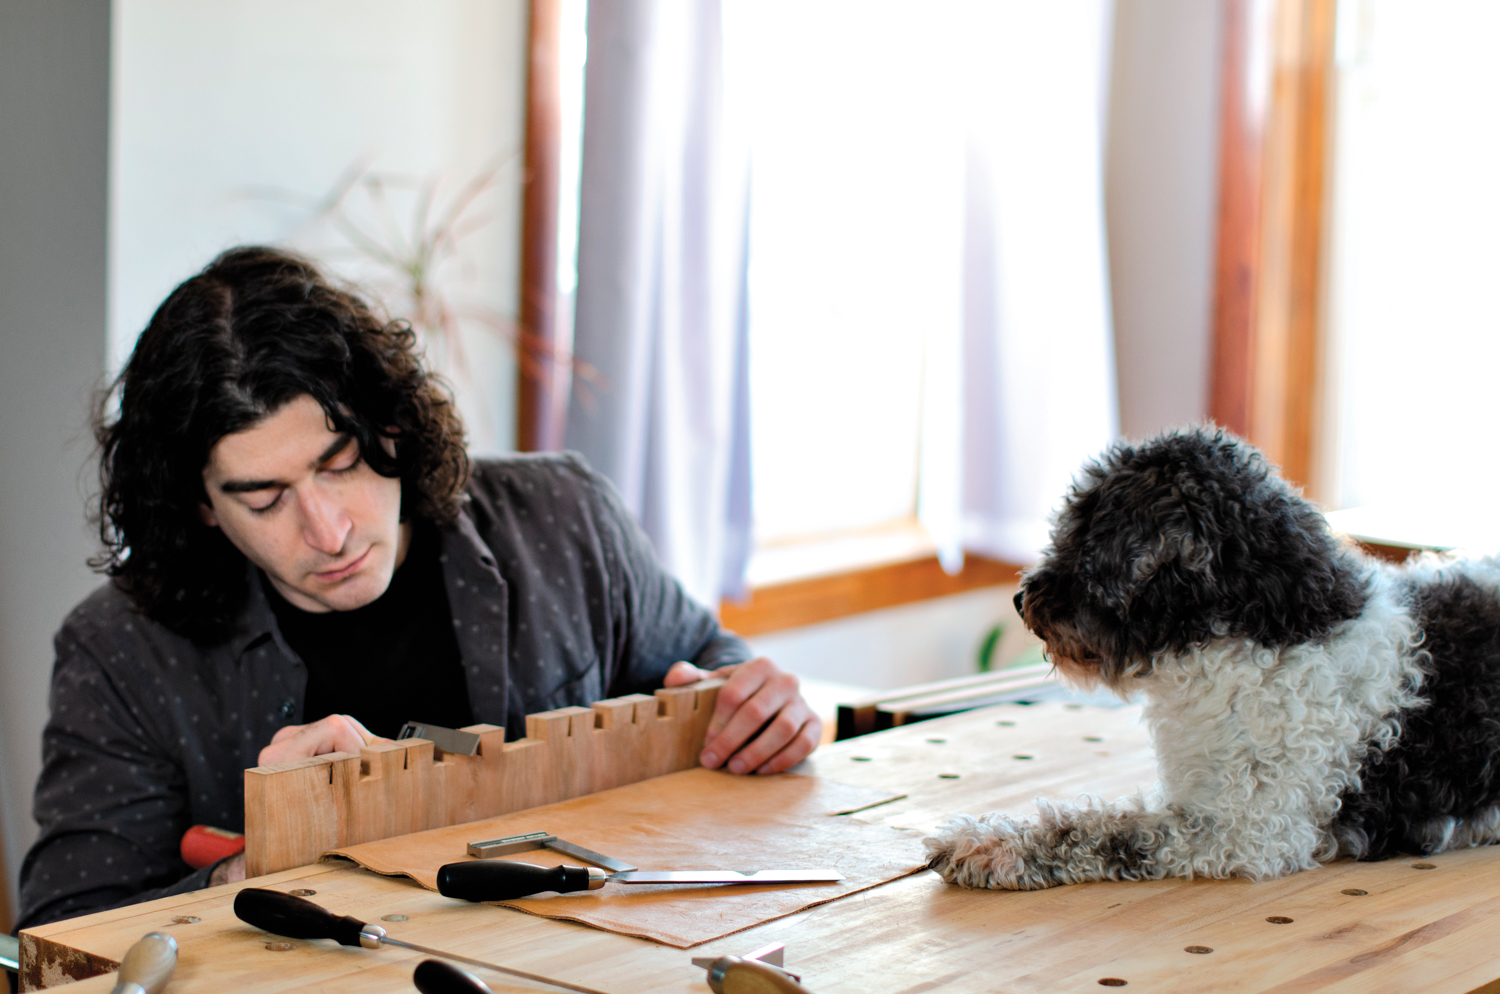 Woodworker Phillip Keefe at work table with black-and-white dog watching him